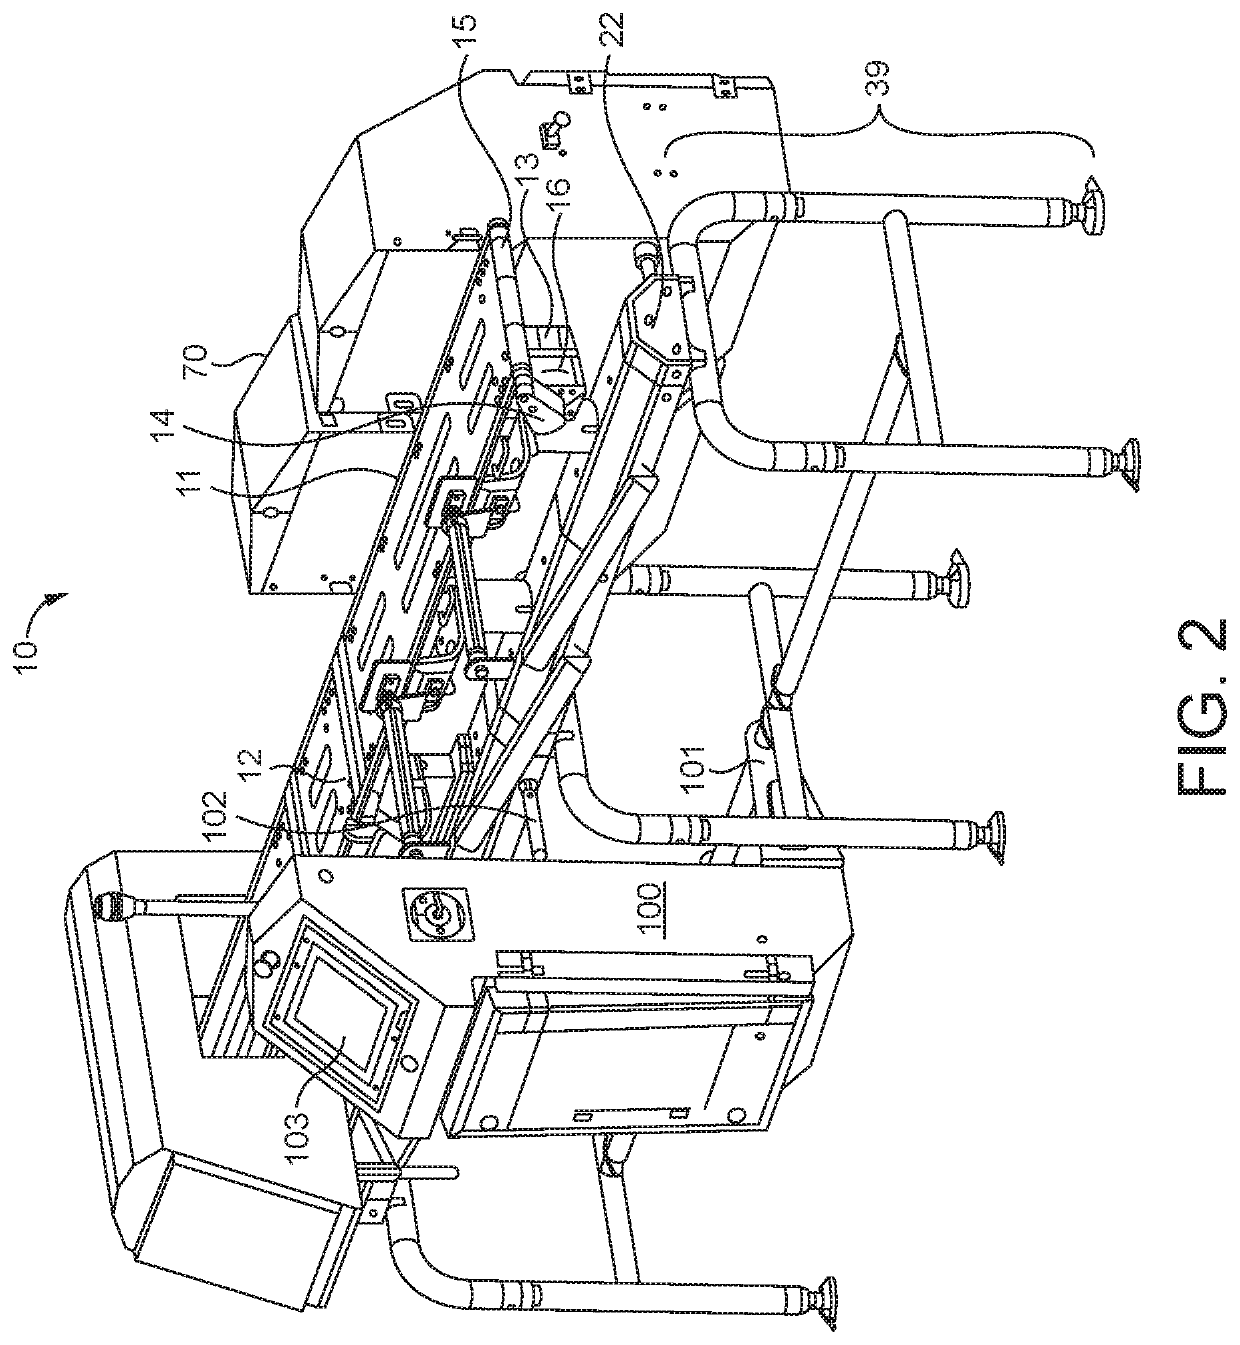 Support structure for a conveyor system